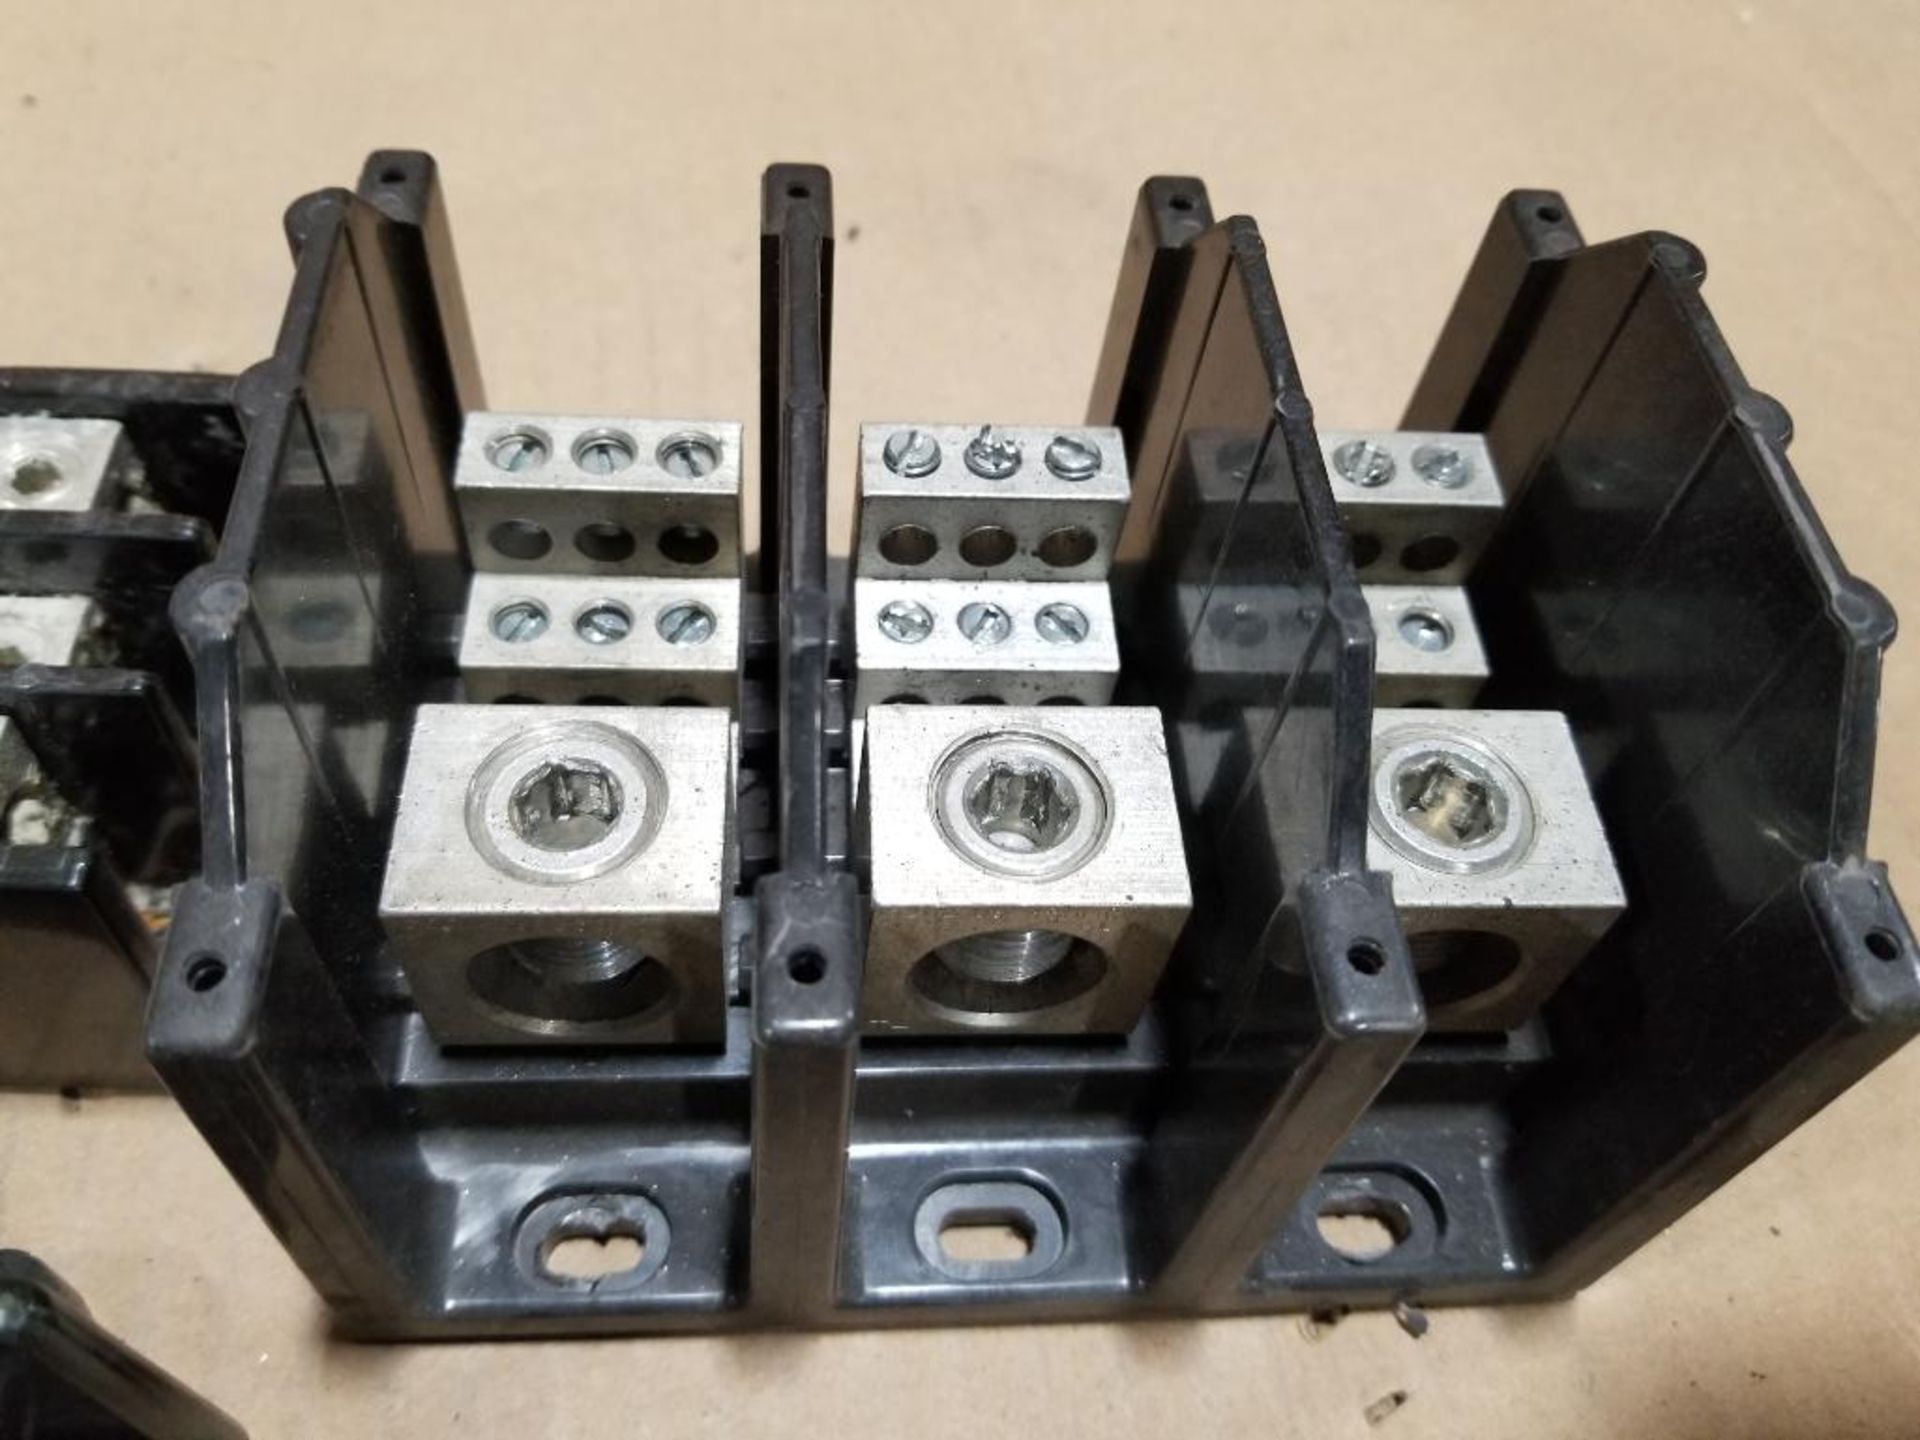 Assorted fuse holders, distribution lugs, and relays. - Image 12 of 15